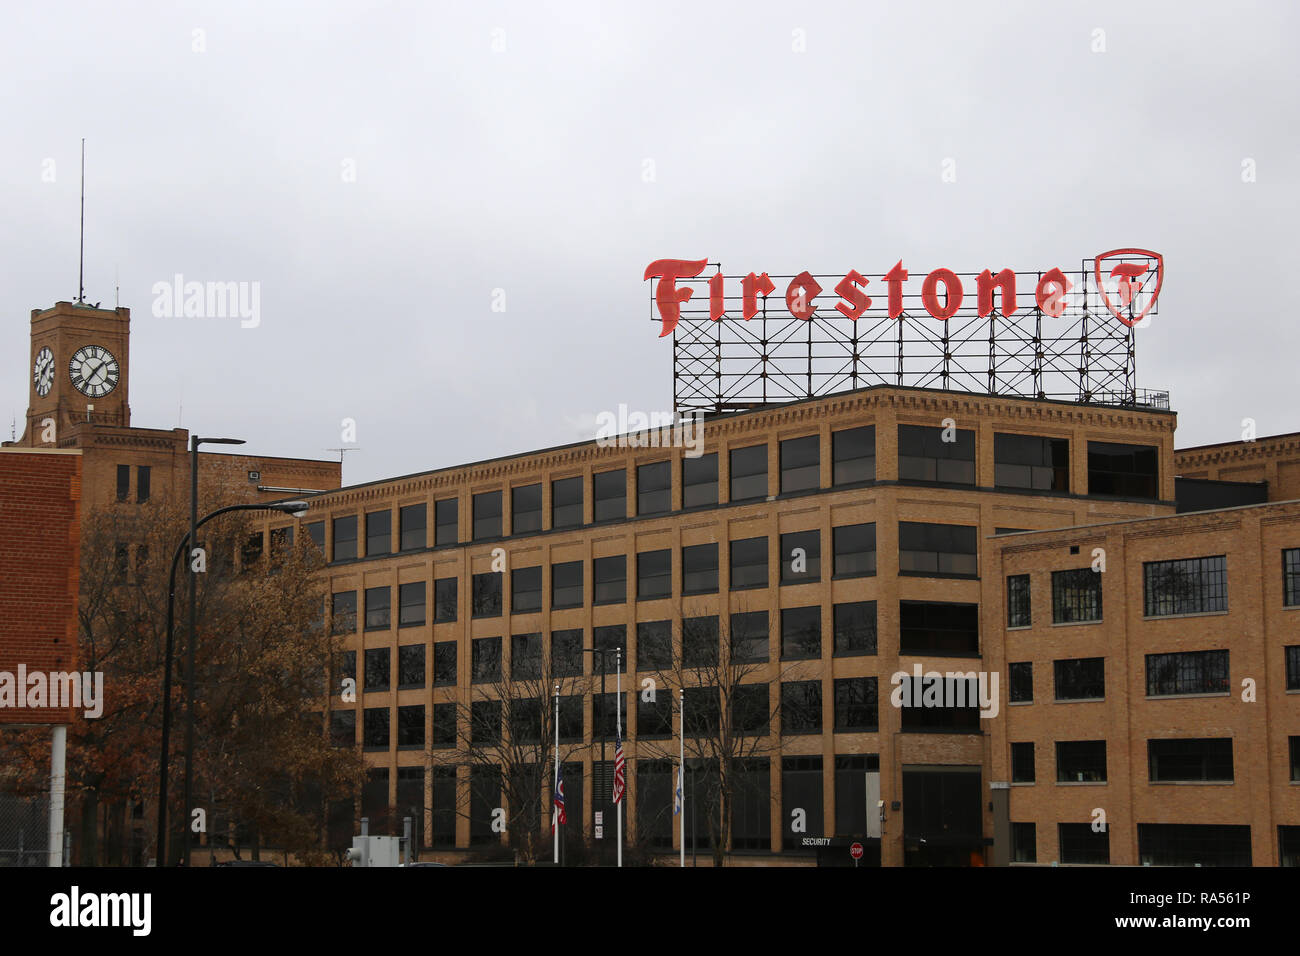 AKRON, OHIO/USA – December, 29: The large rooftop sign of the old Firestone Tire Company in Akron, Ohio Stock Photo